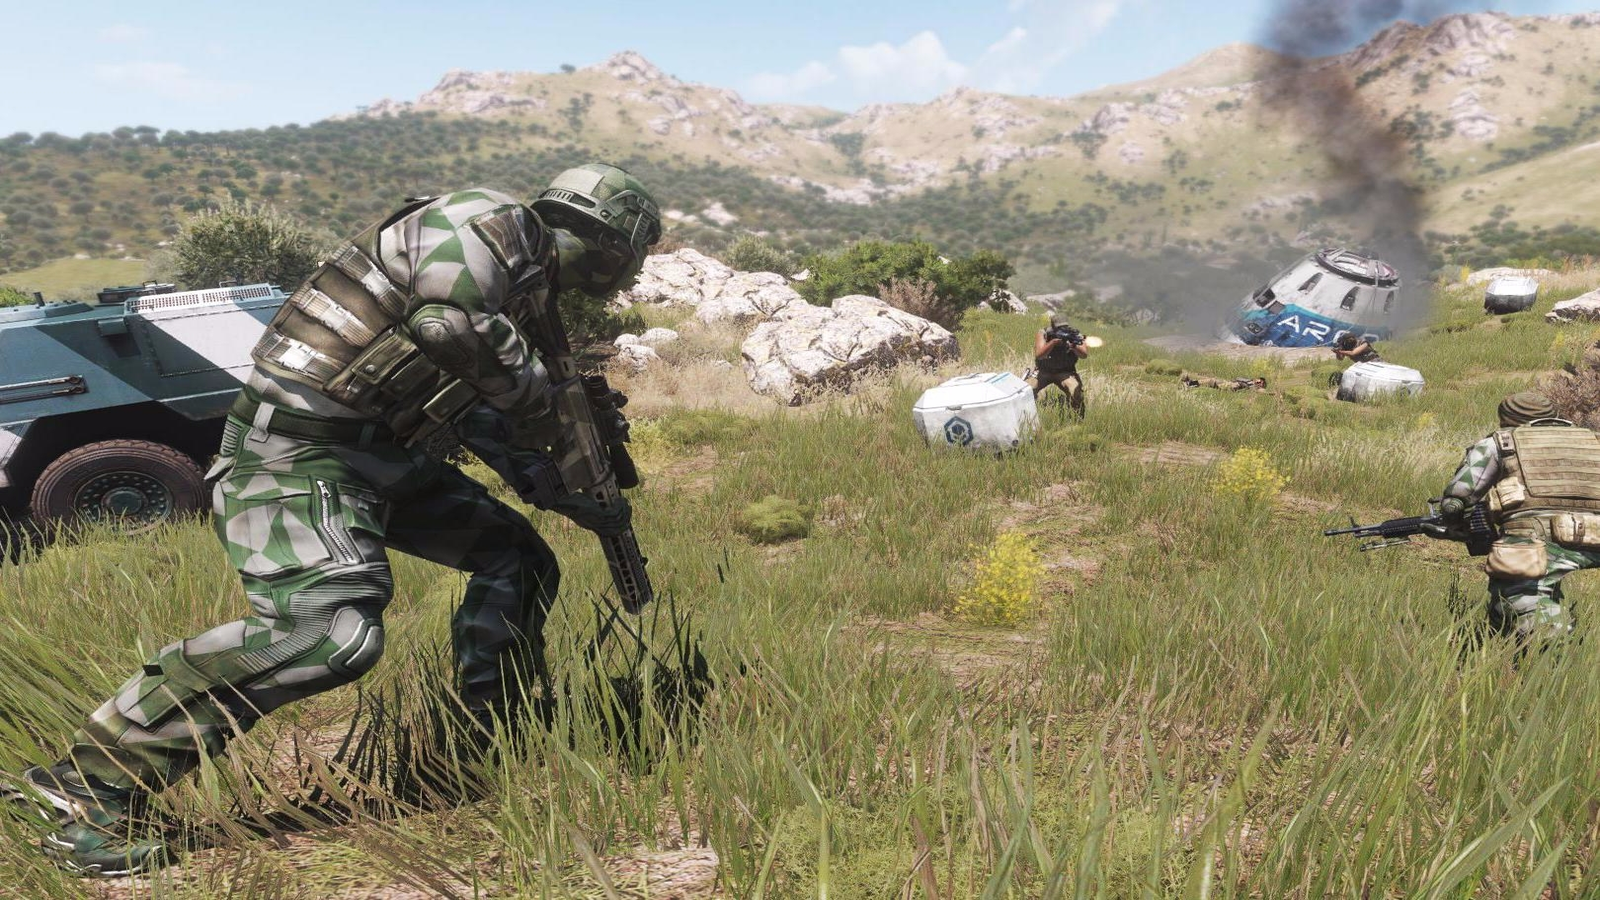 Free update adds competitive large-scale multiplayer mode to Arma 3